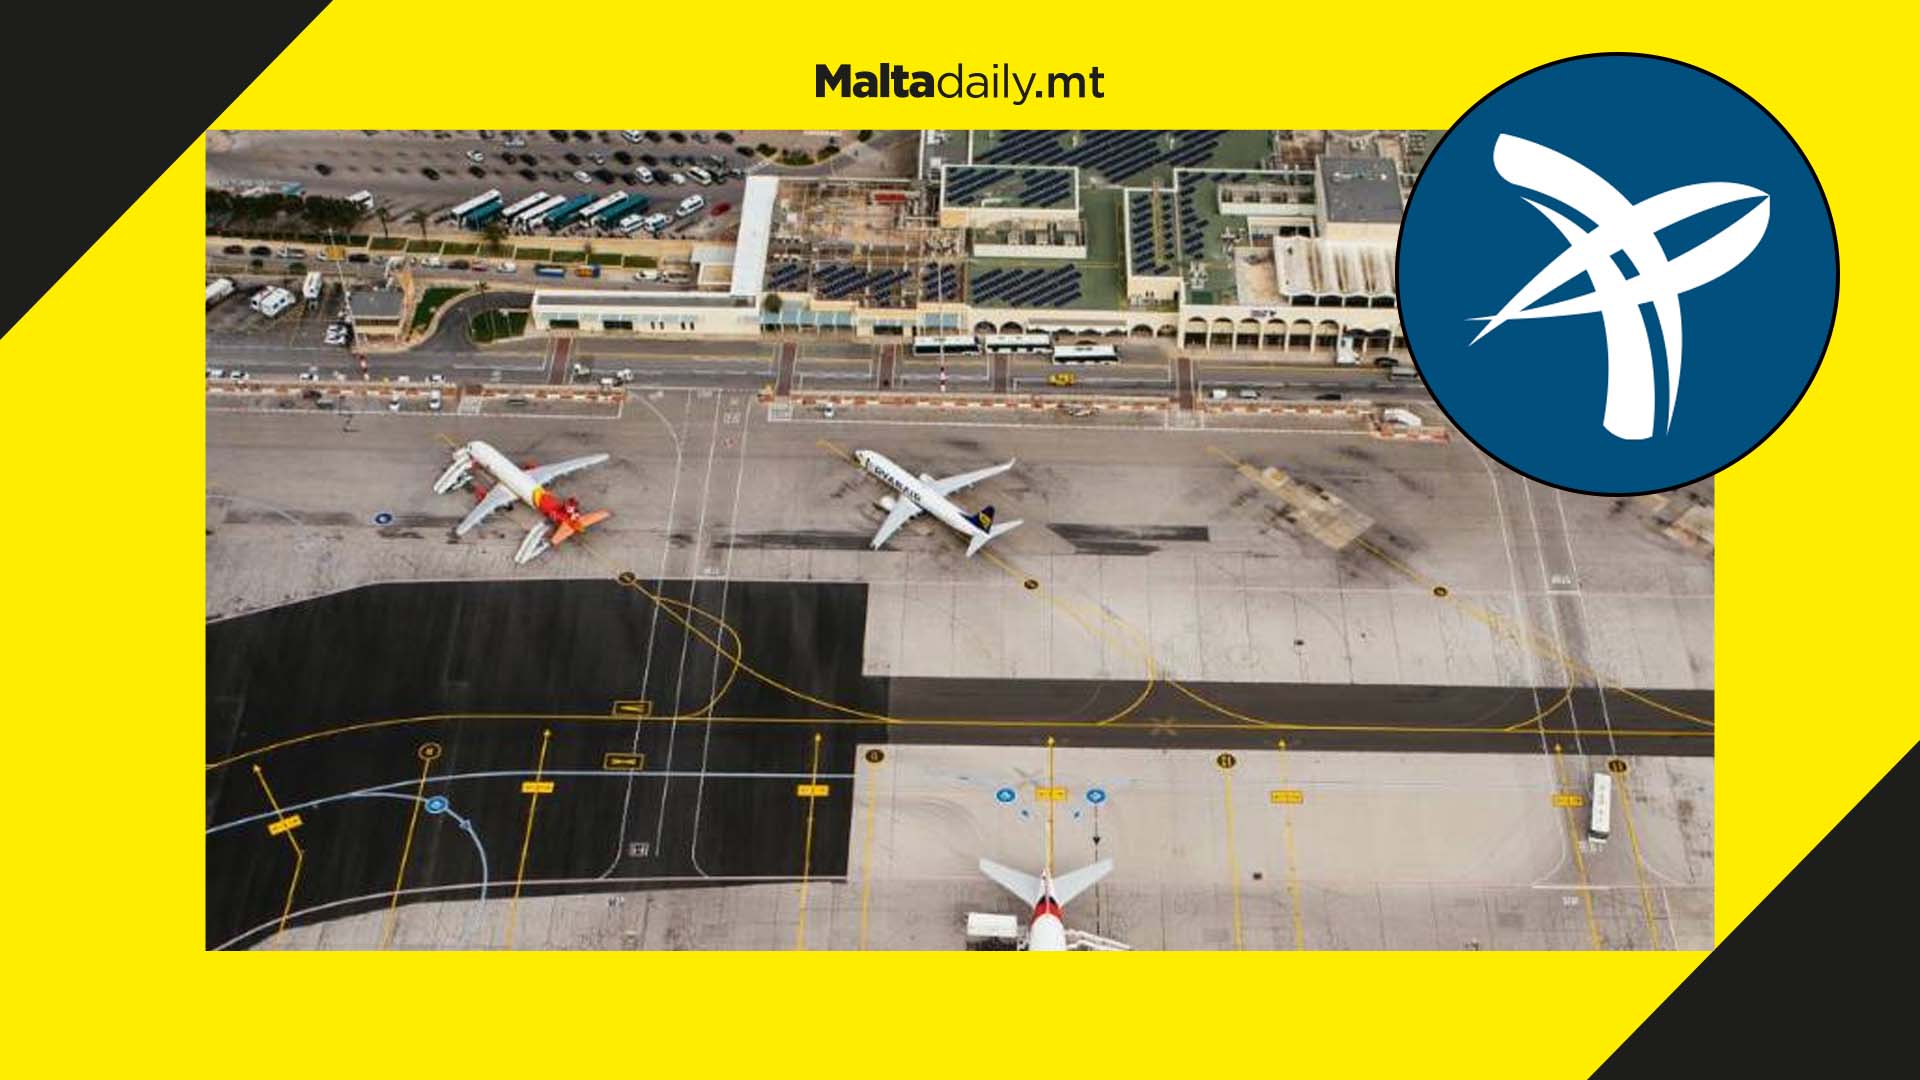 €40 million investment by Malta Airport for new apron and taxiway